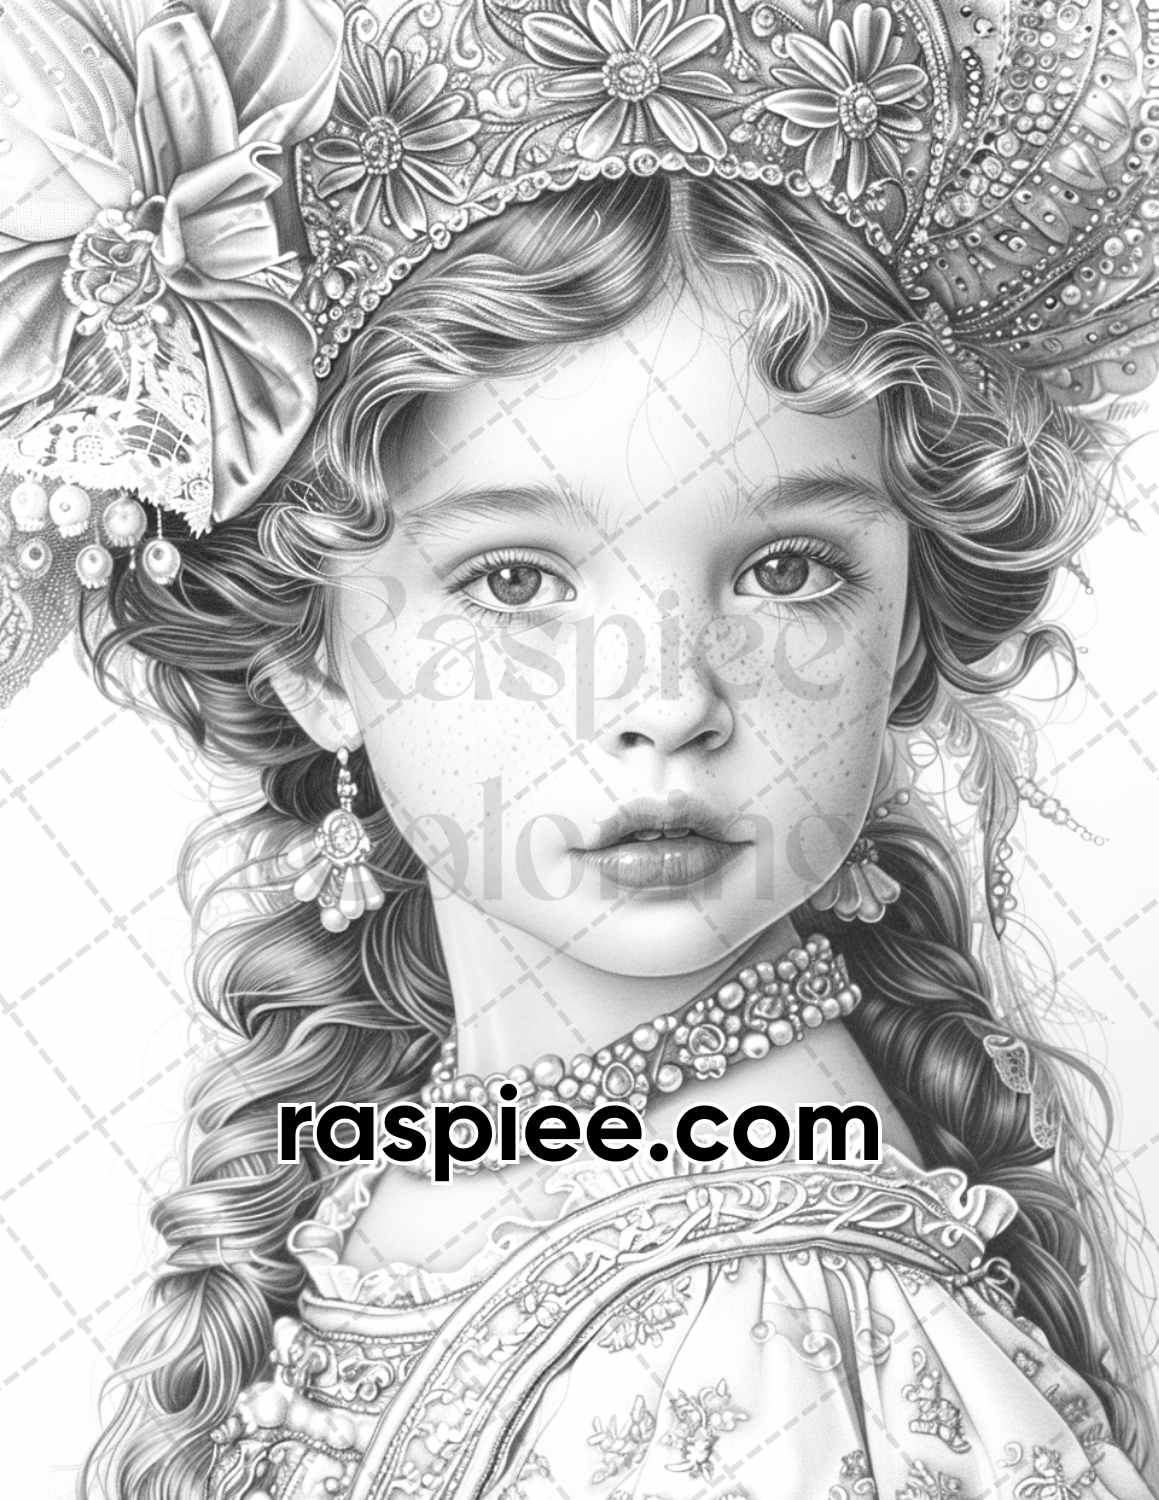 adult coloring pages, adult coloring sheets, adult coloring book pdf, adult coloring book printable, grayscale coloring pages, grayscale coloring books, portrait coloring pages for adults, portrait coloring book, grayscale illustration, Elizabethan British Royal coloring pages